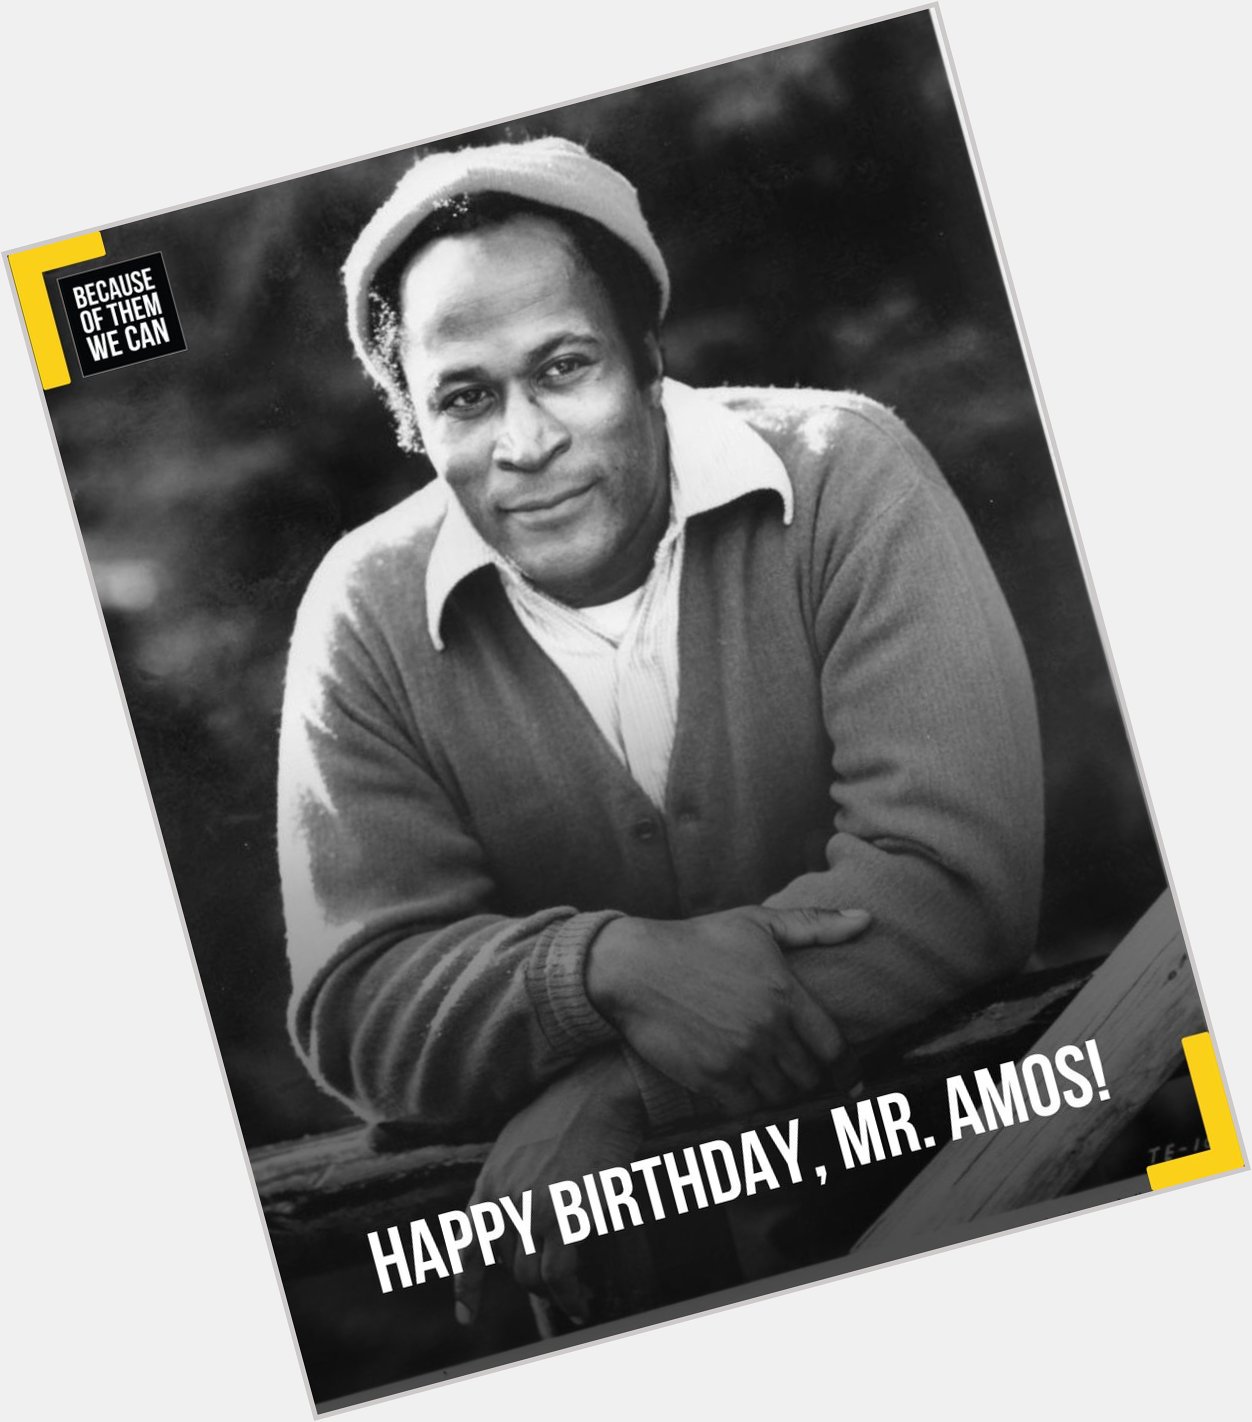 Happy 83rd birthday to the man who s given us some great films and good times, John Amos! 